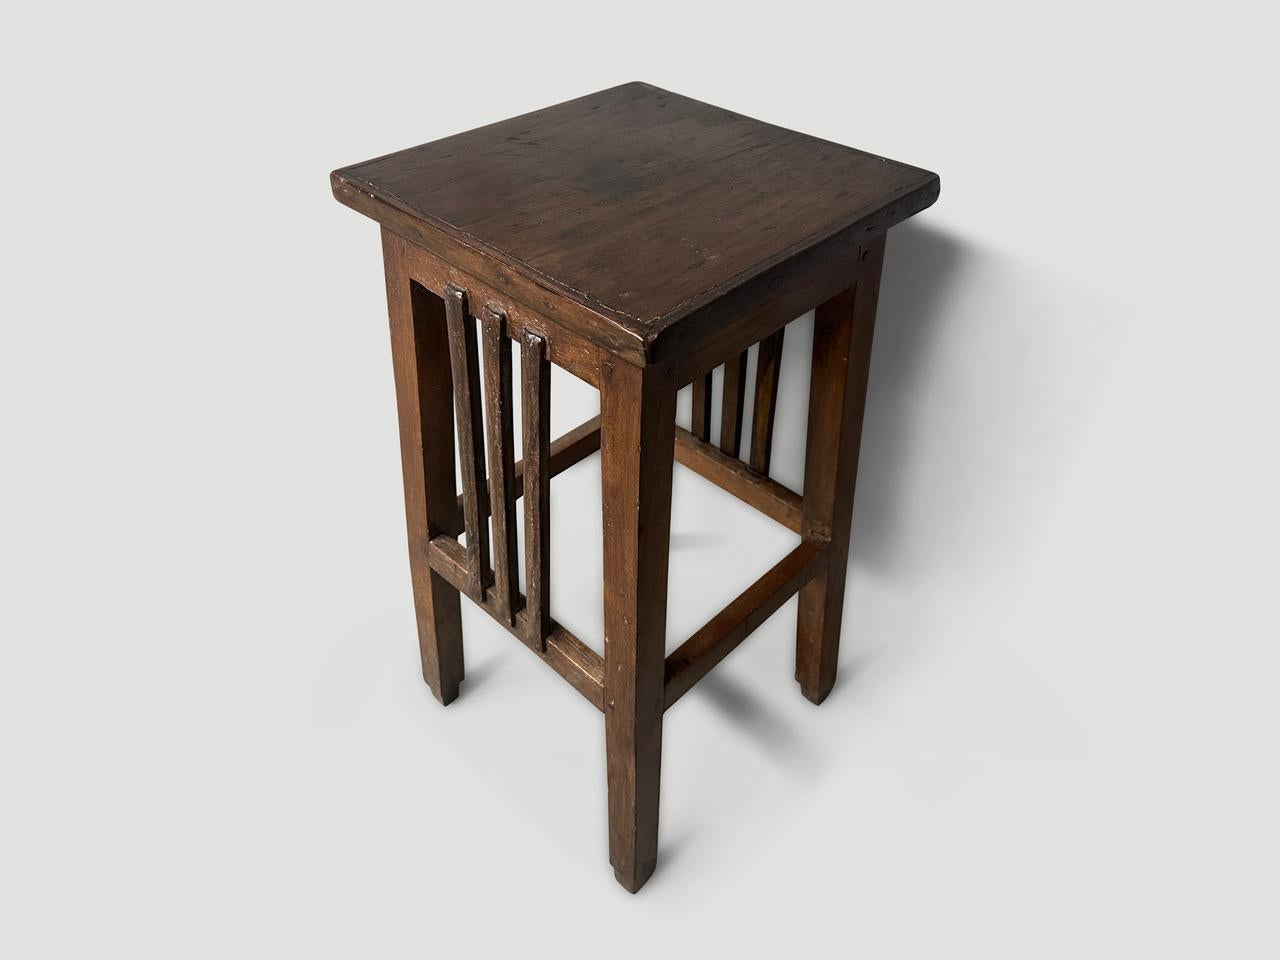 Andrianna Shamaris Antique Teak Wood Pedestal or Tall Side Table In Excellent Condition For Sale In New York, NY